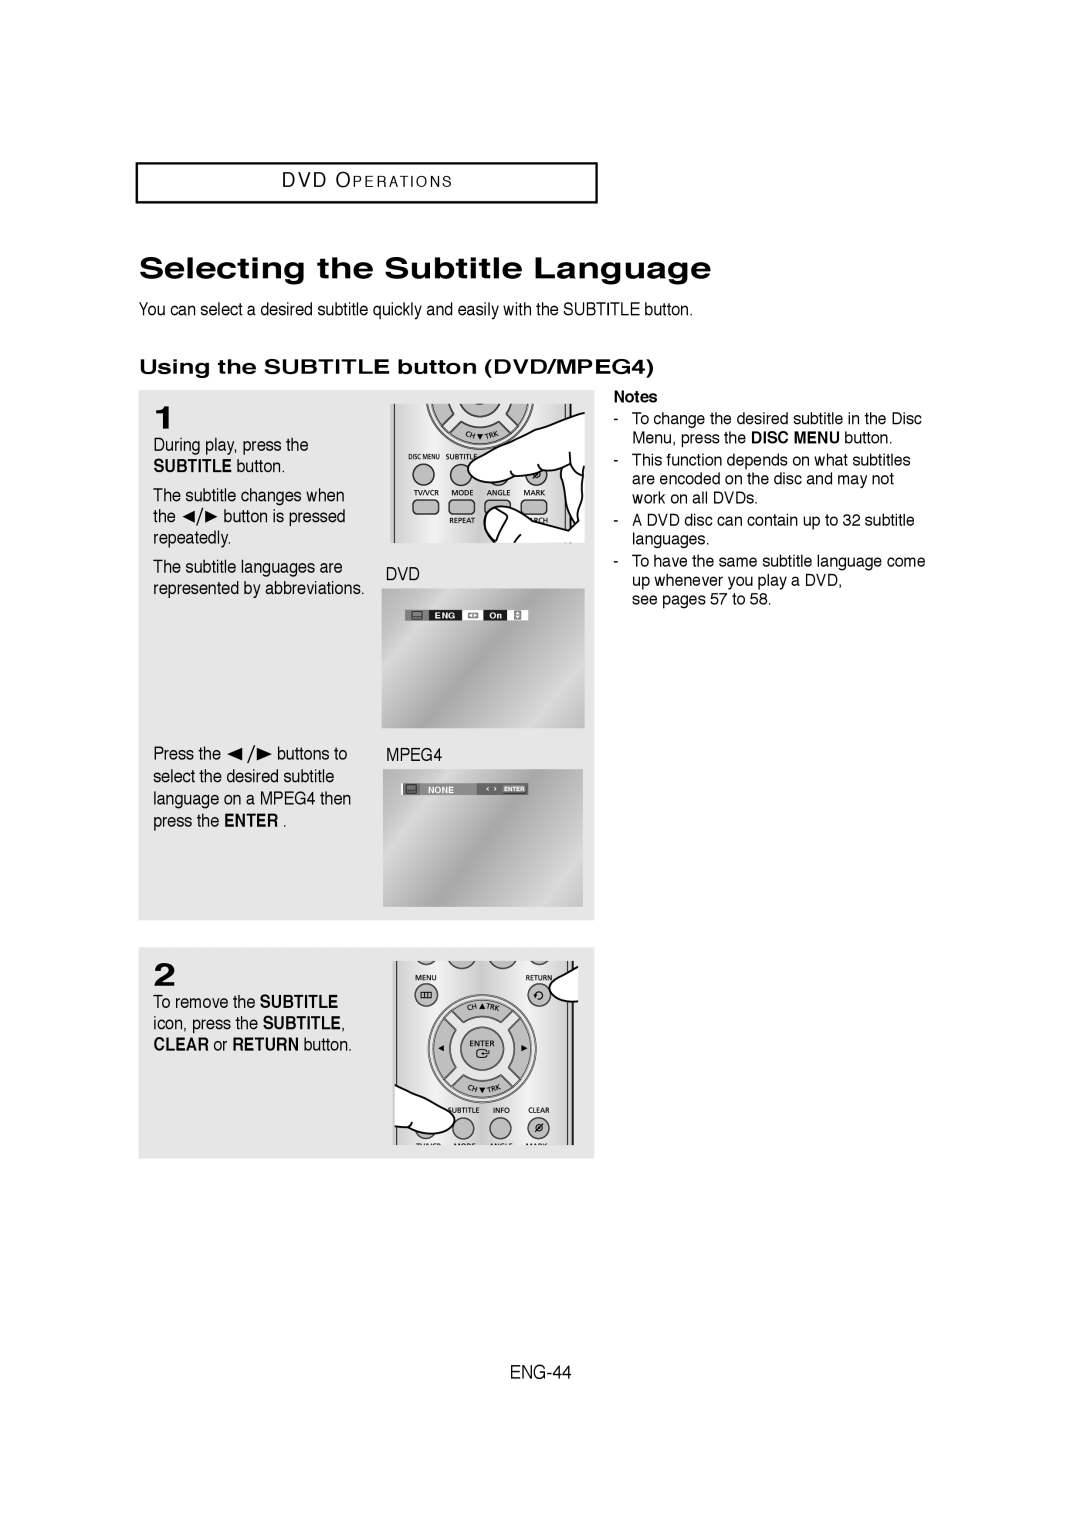 Samsung V6700-XAC, AK68-01304A, 20070205090323359 Selecting the Subtitle Language, Using the SUBTITLE button DVD/MPEG4 